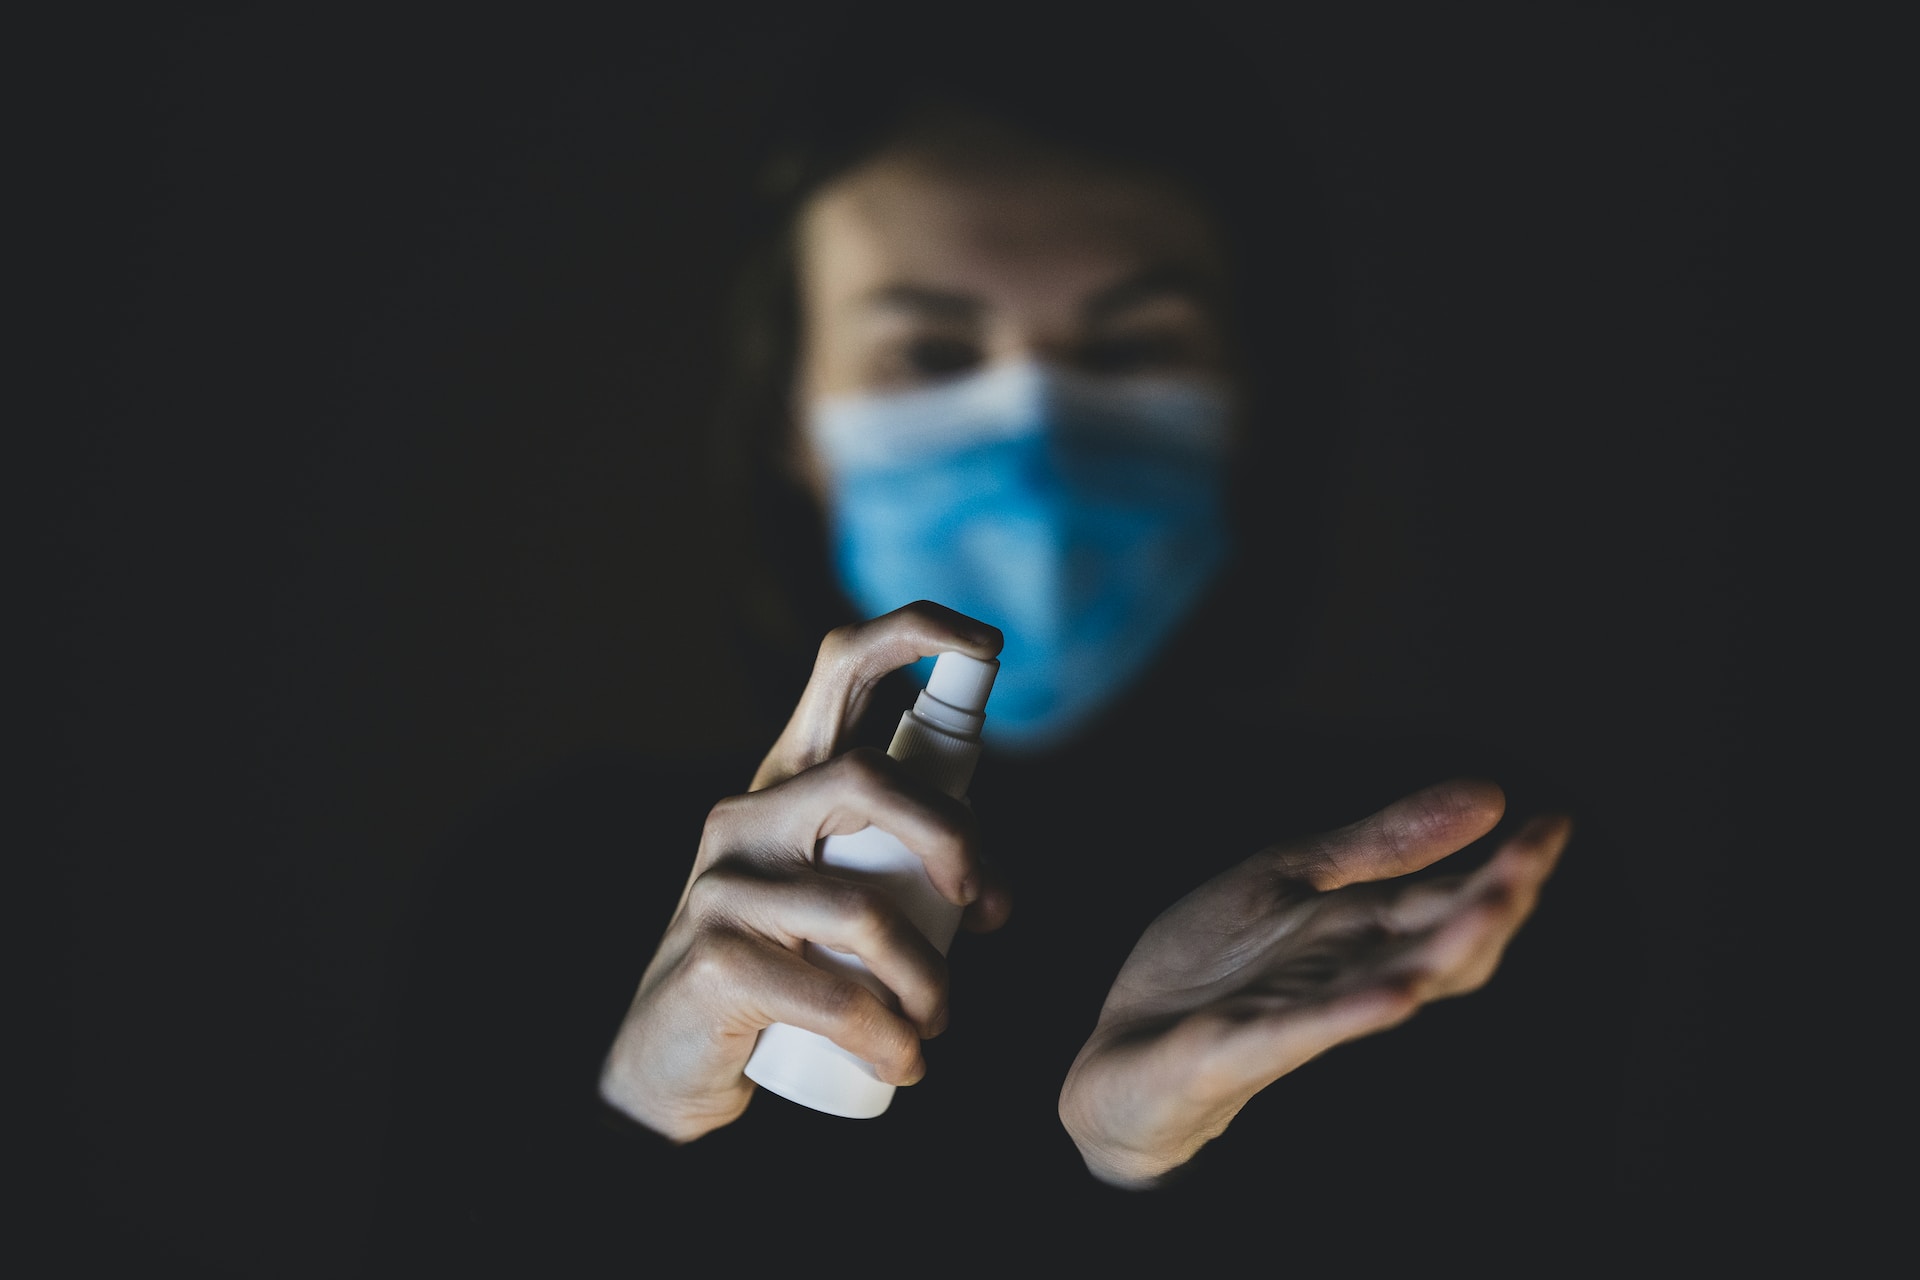 A man wearing a surgical mask using a hand sanitizer